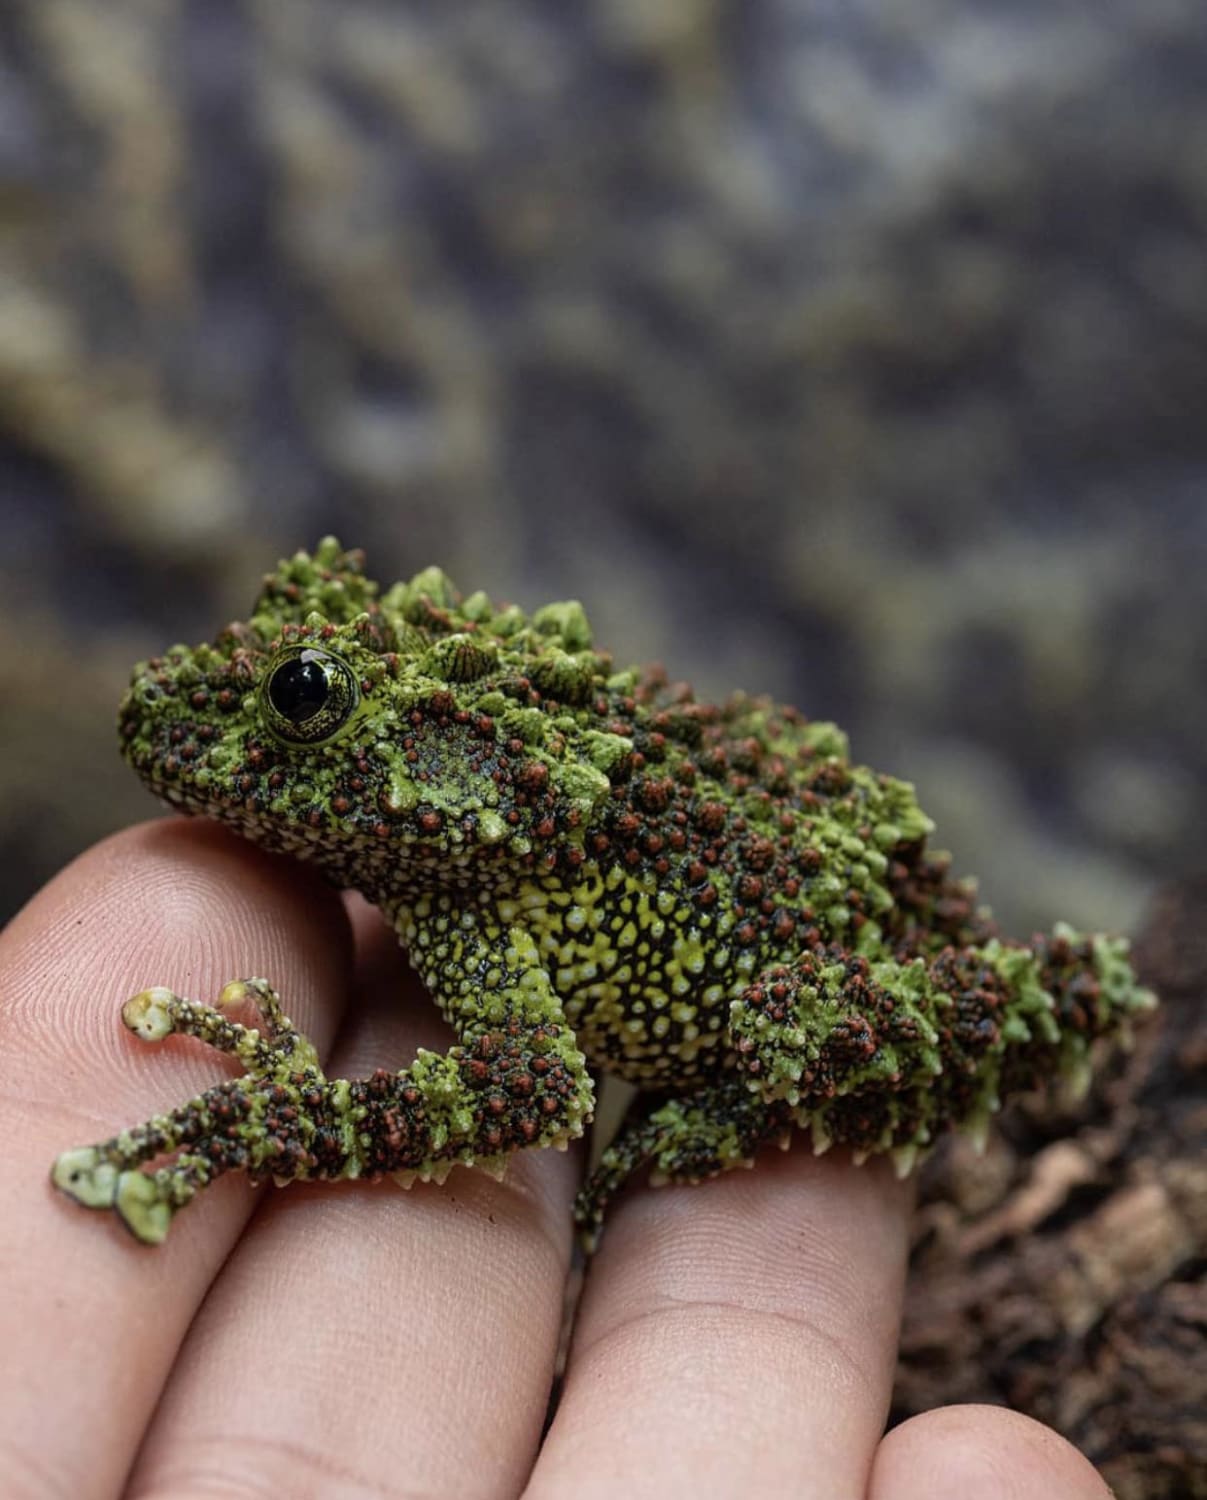 Vietnamese Mossy Frogs camo game is strong.